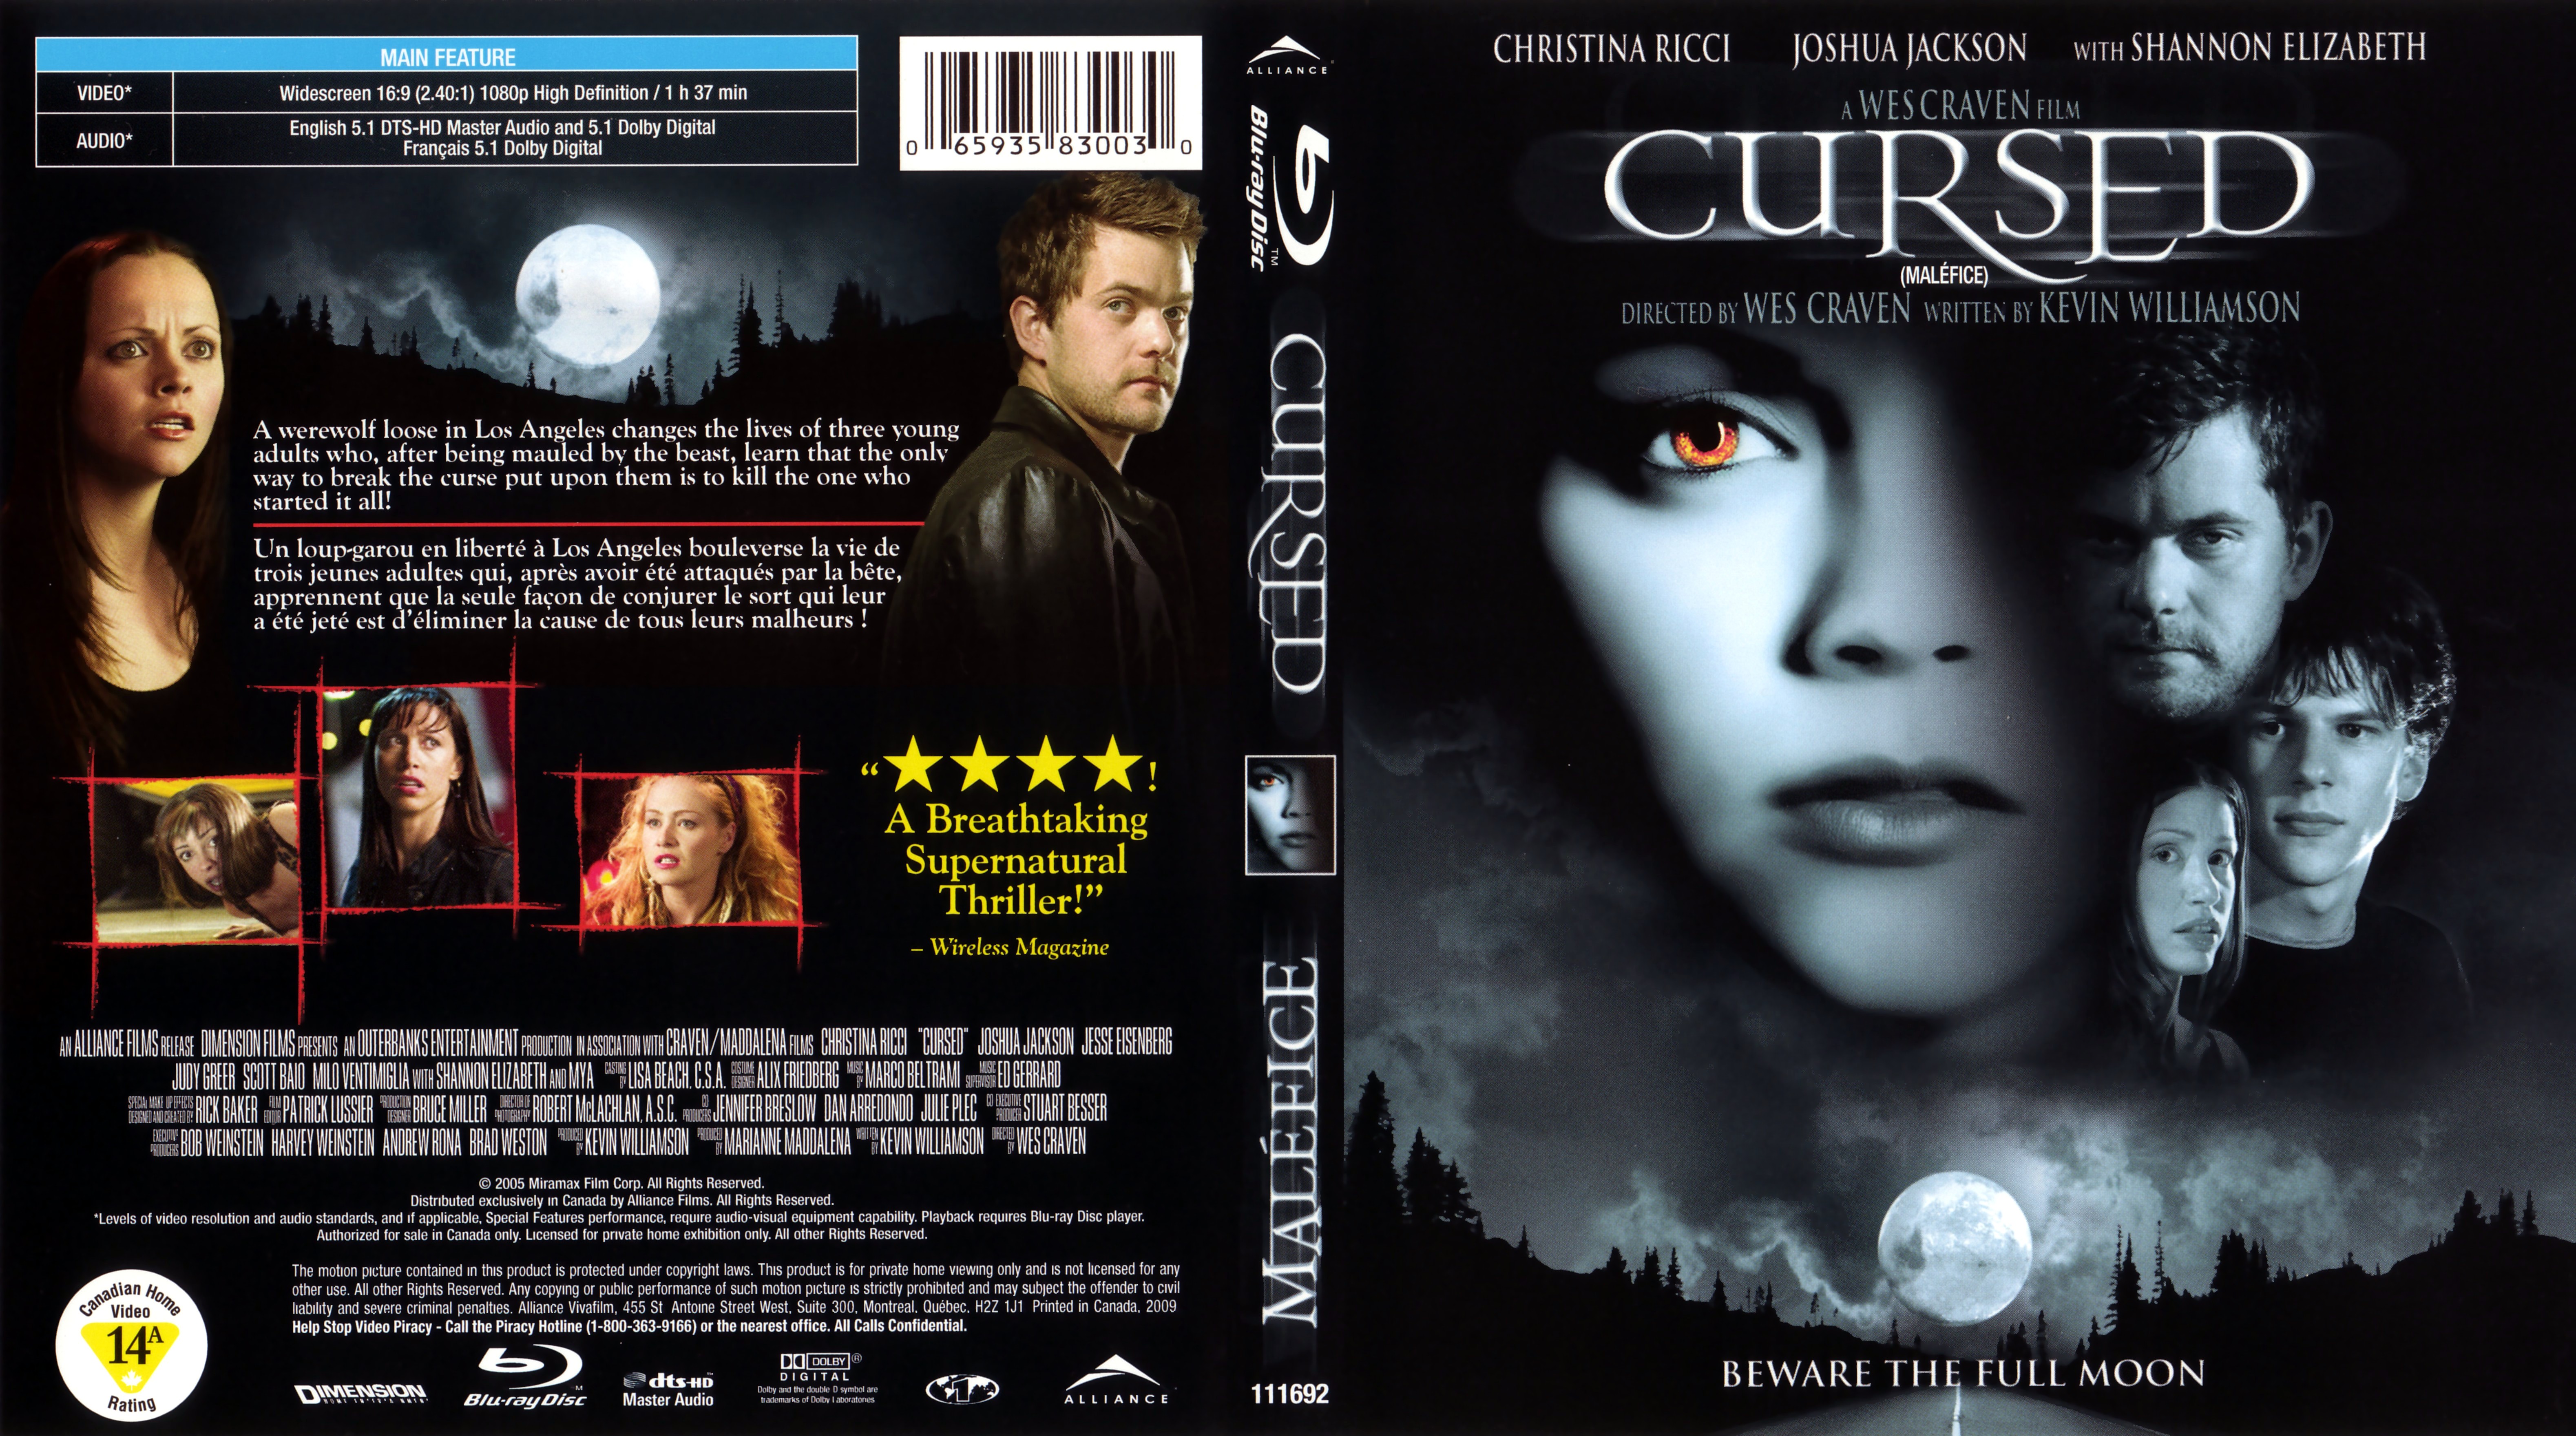 Jaquette DVD Cursed (Canadienne) (BLU-RAY)